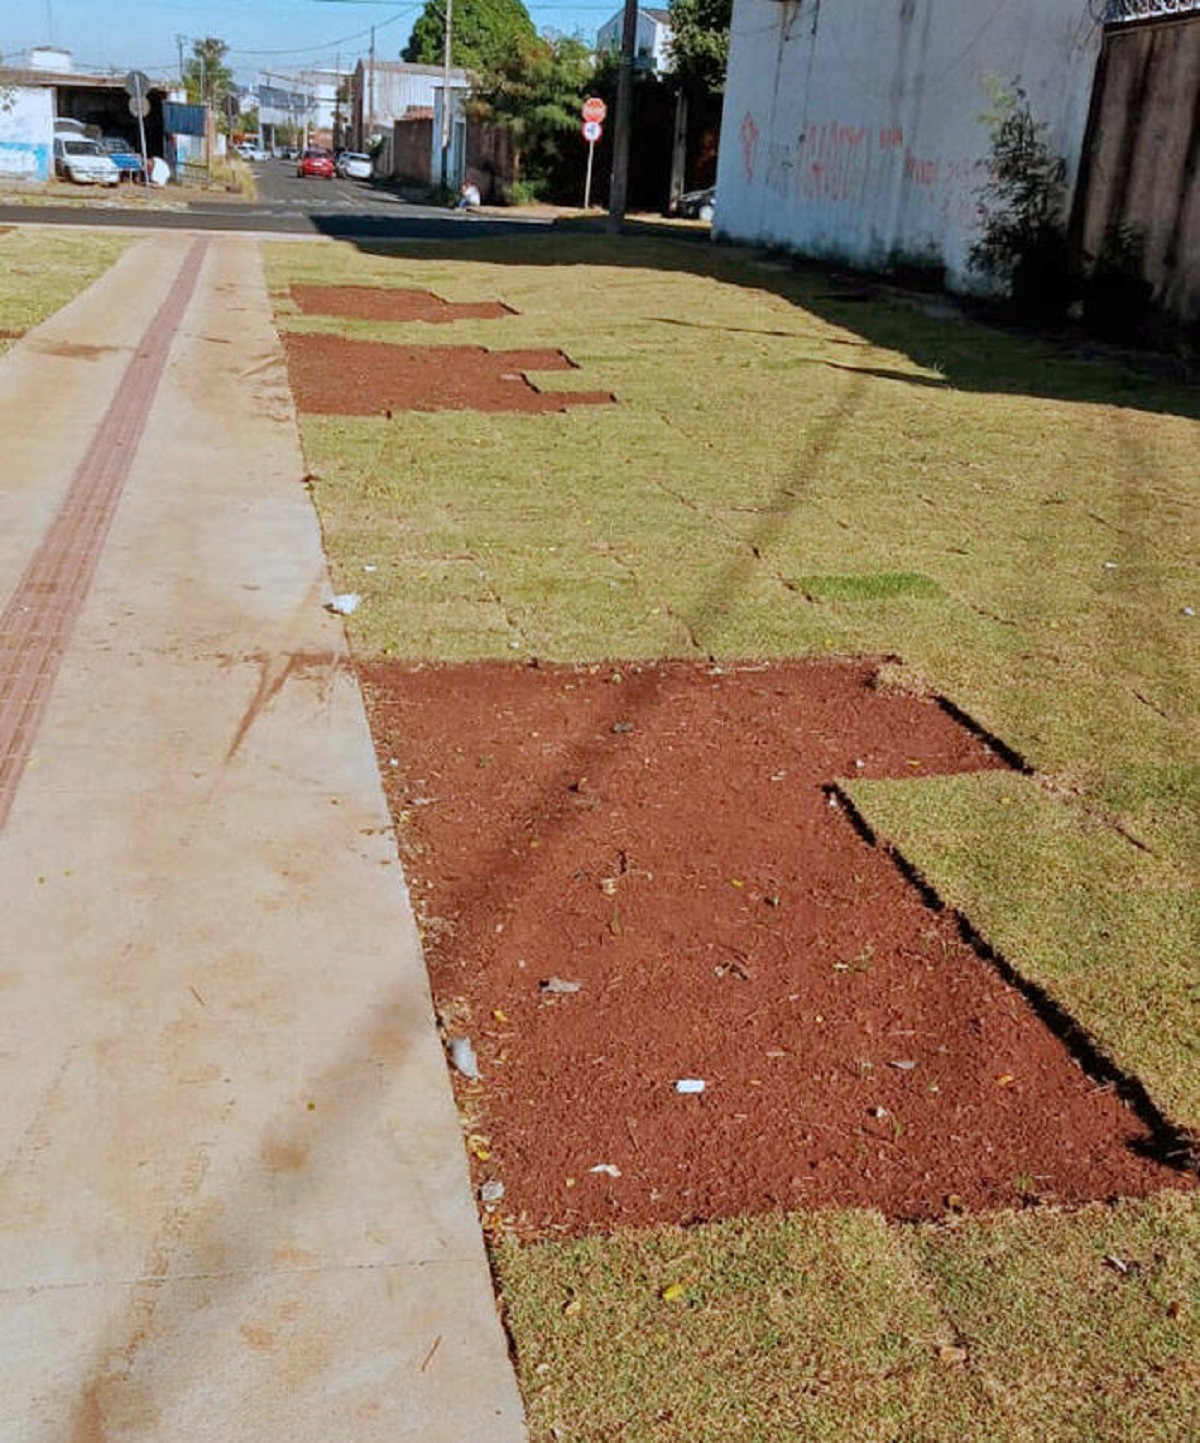 "People Are Robbing Grass At A Square That Is Being Constructed In My Neighborhood"